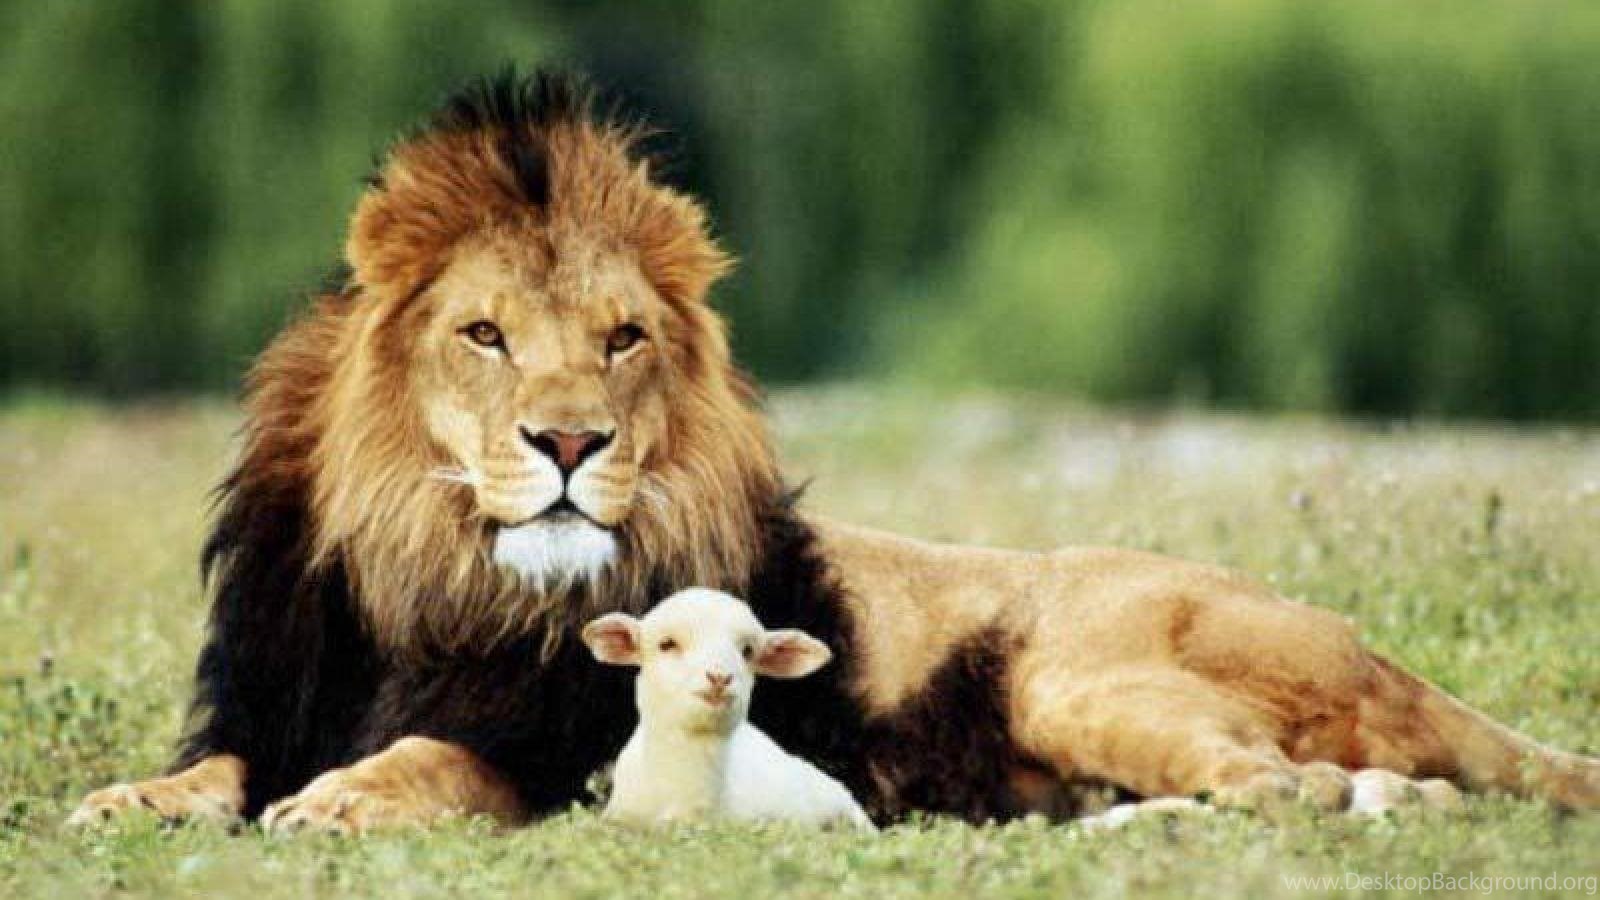 THE LION AND THE LAMB WALLPAPER Desktop Background